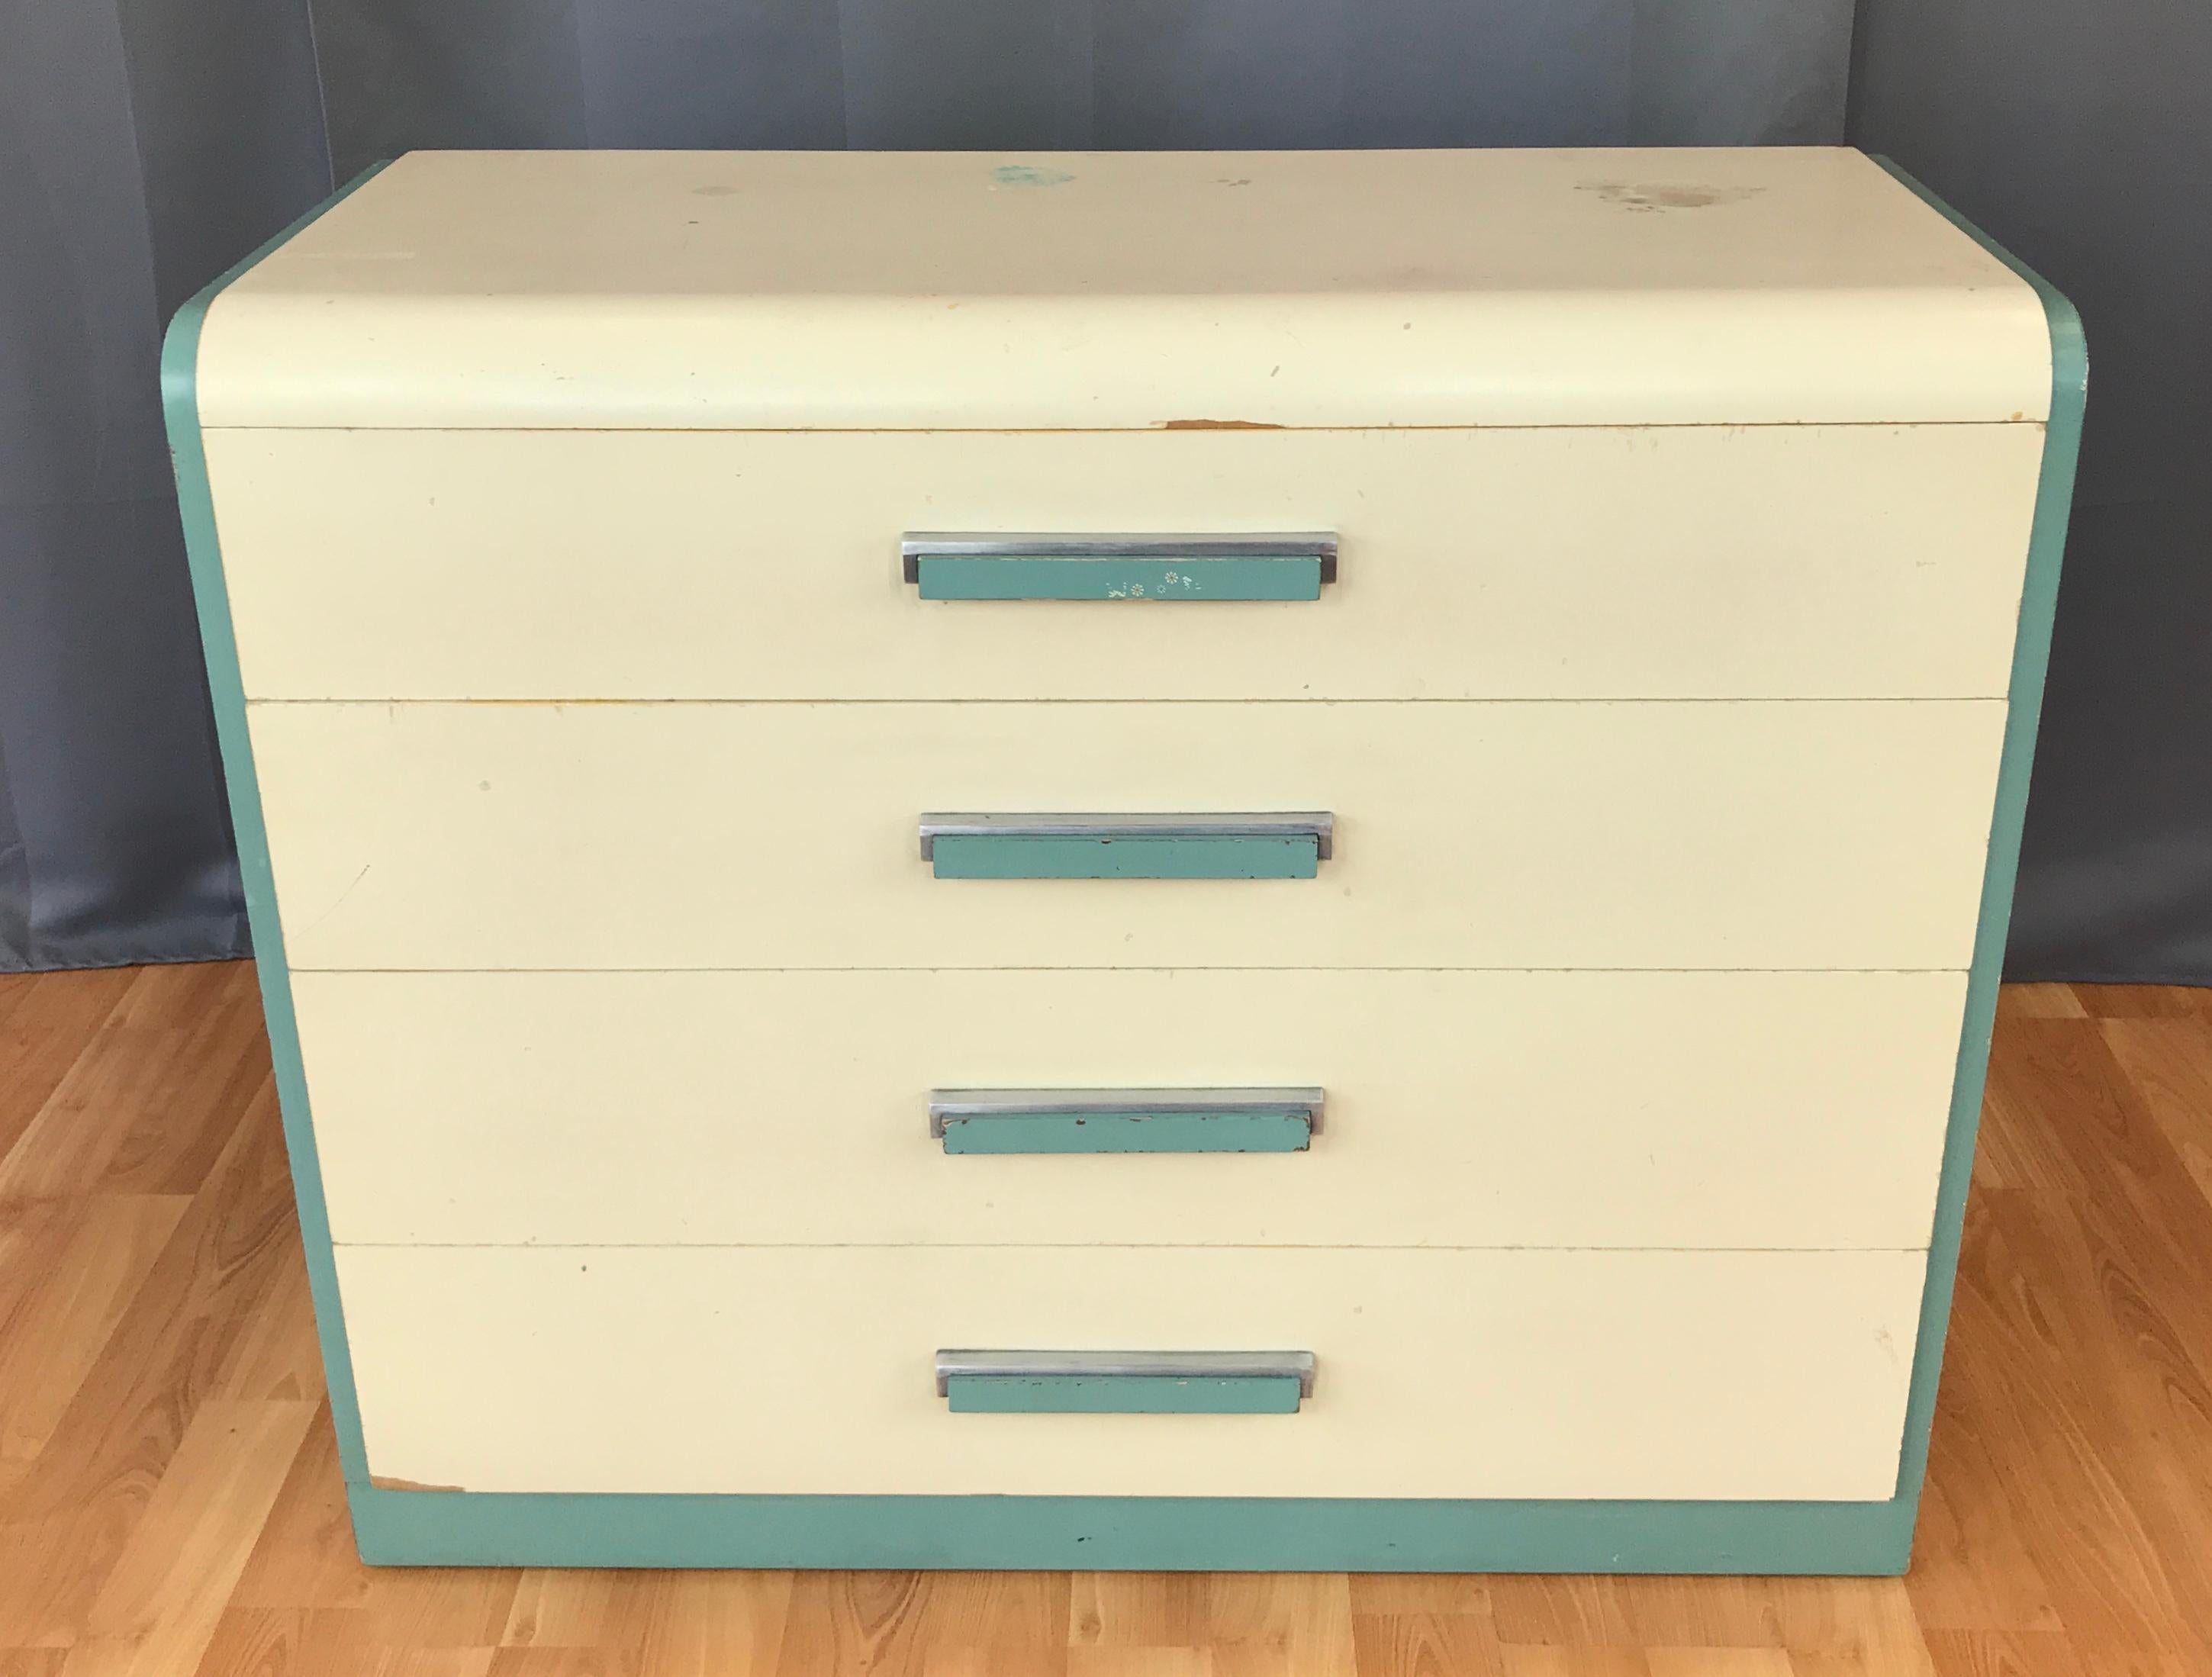 Offered here is a circa 1930s dresser designed by Donald Deskey for Widdicomb Furniture Company of Grand Rapids.

In its original paint color. This example evokes streamliner feel of the high Art Deco style with nautical celadon green and white